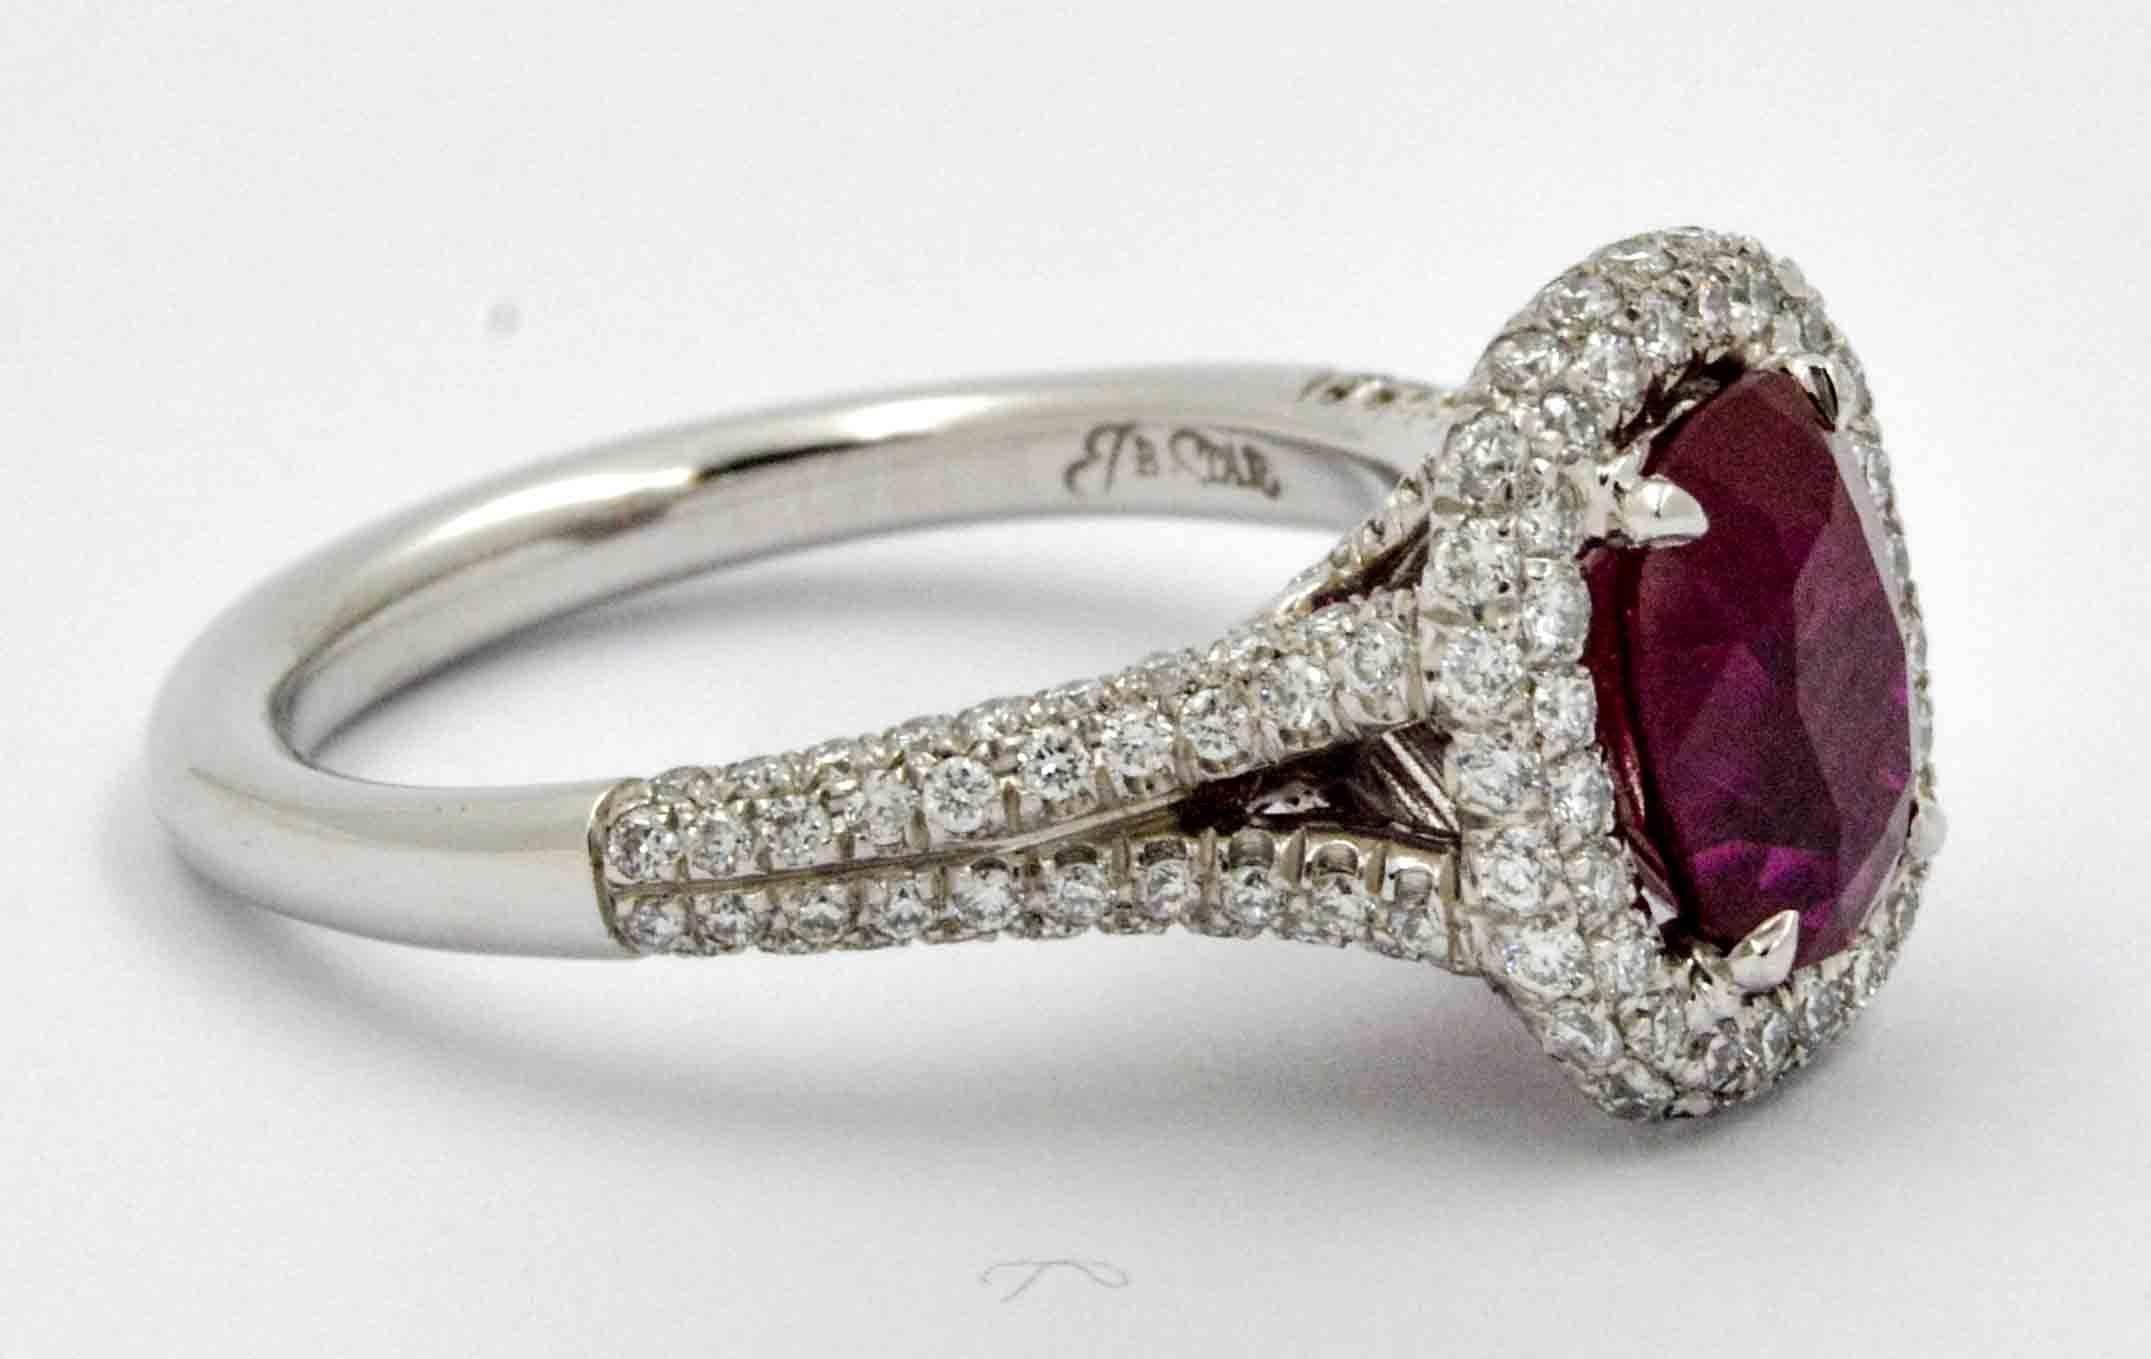 This vibrant JB Star platinum ring features a fine oval ruby, weighing a total of 2.10 carats. The ruby is surrounded by 156 round brilliant cut diamonds in a pave halo and split shank, weighing a total of .85 carats. The diamonds have G-H color and